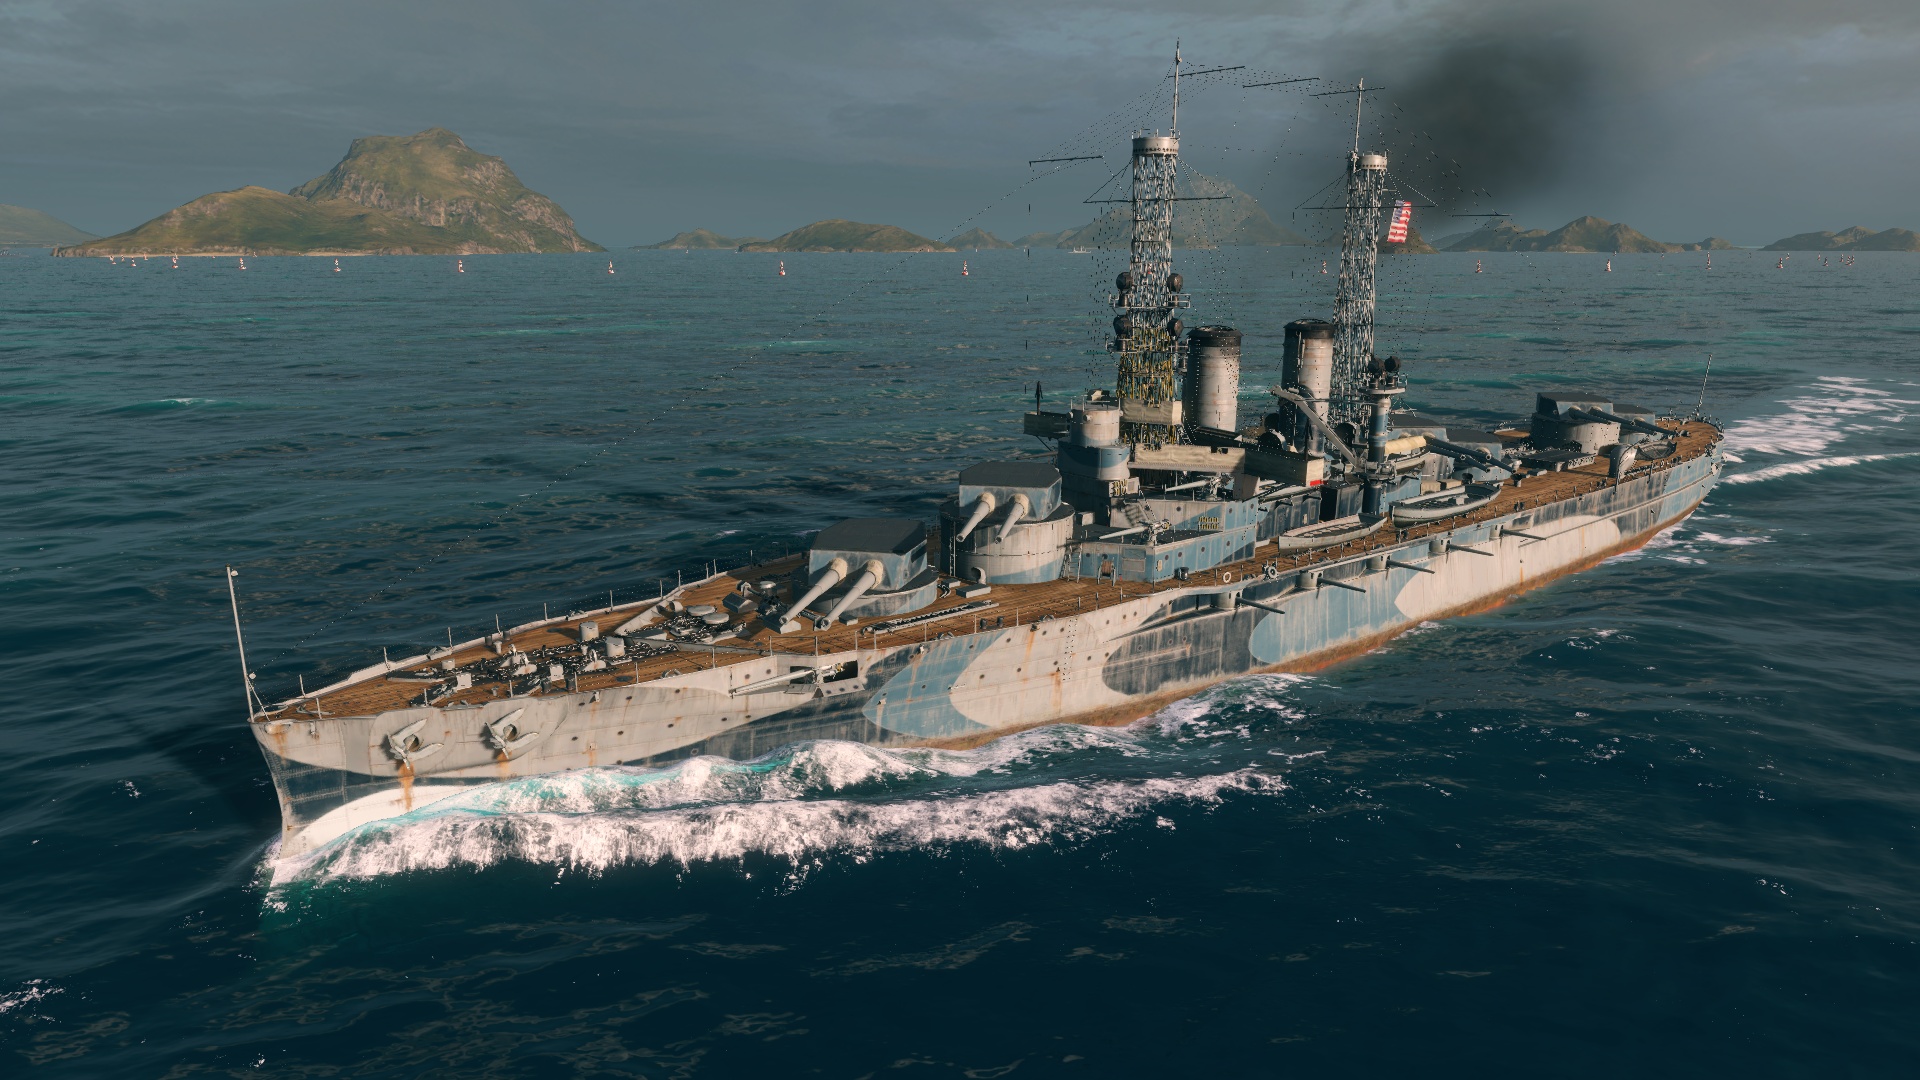 change camouflage in world of warships